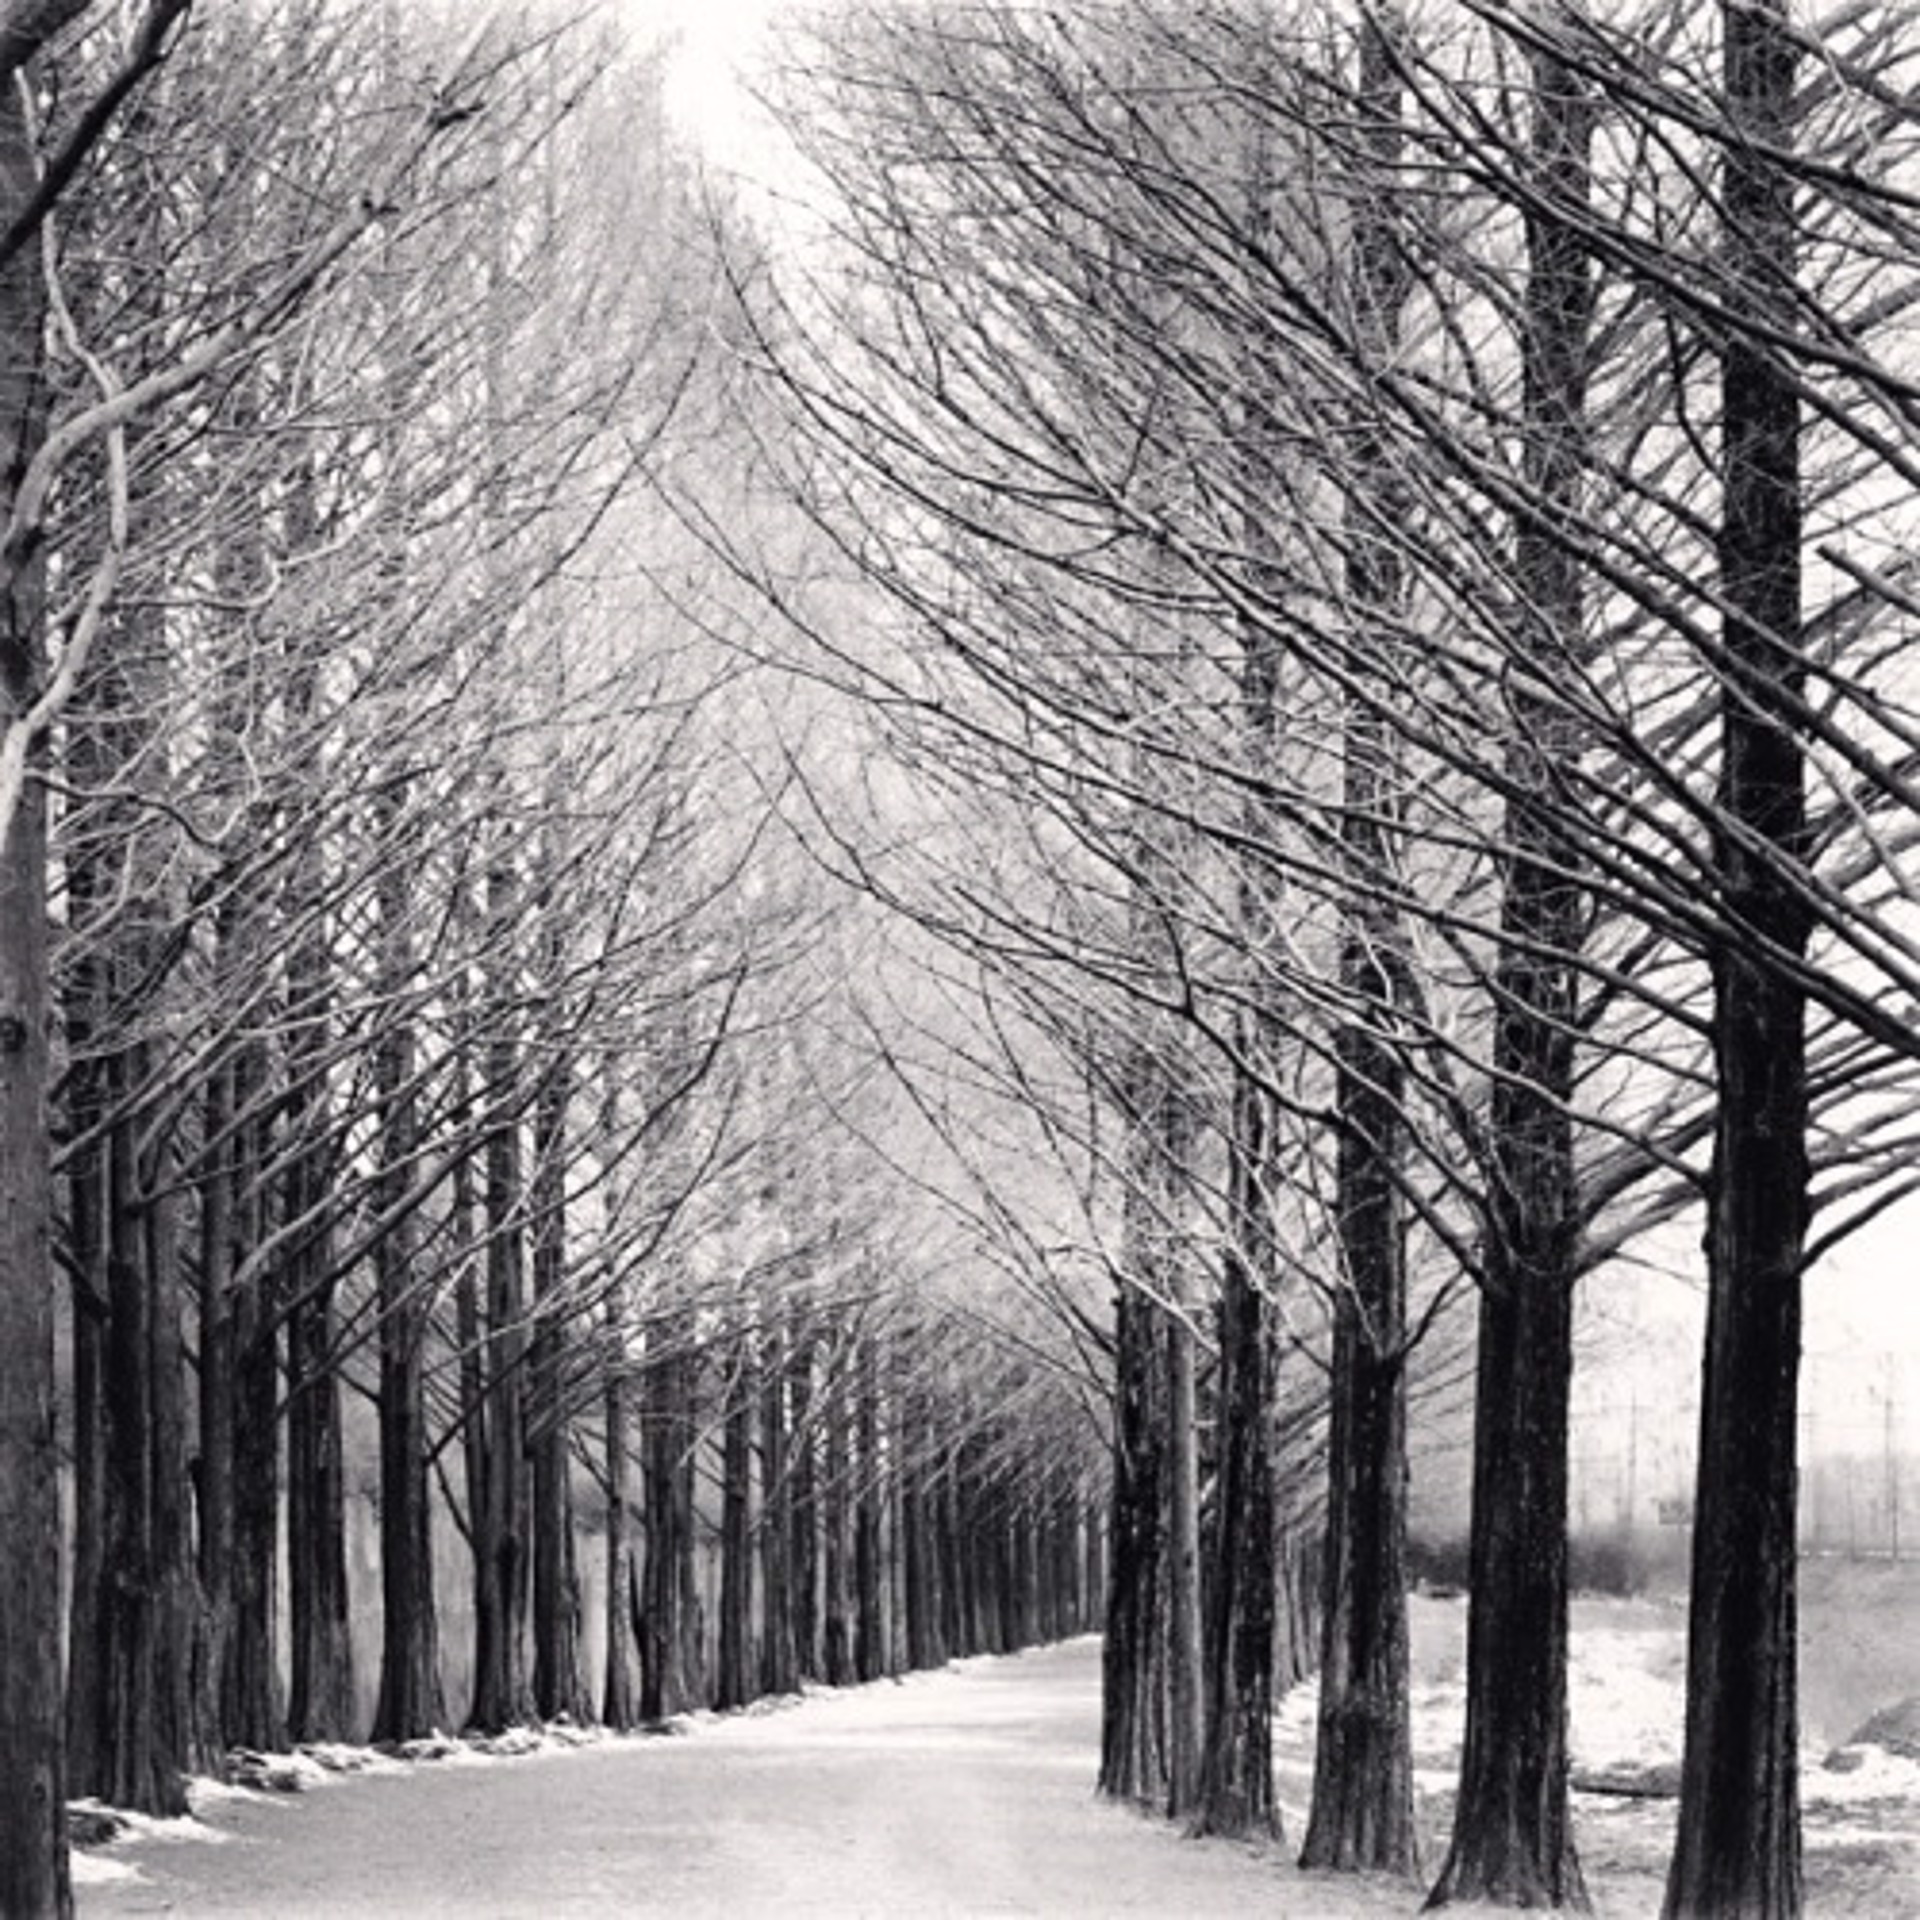 Alley of Trees, Damyang, Jeollanamdo, South Korea (edition of 45) by Michael Kenna